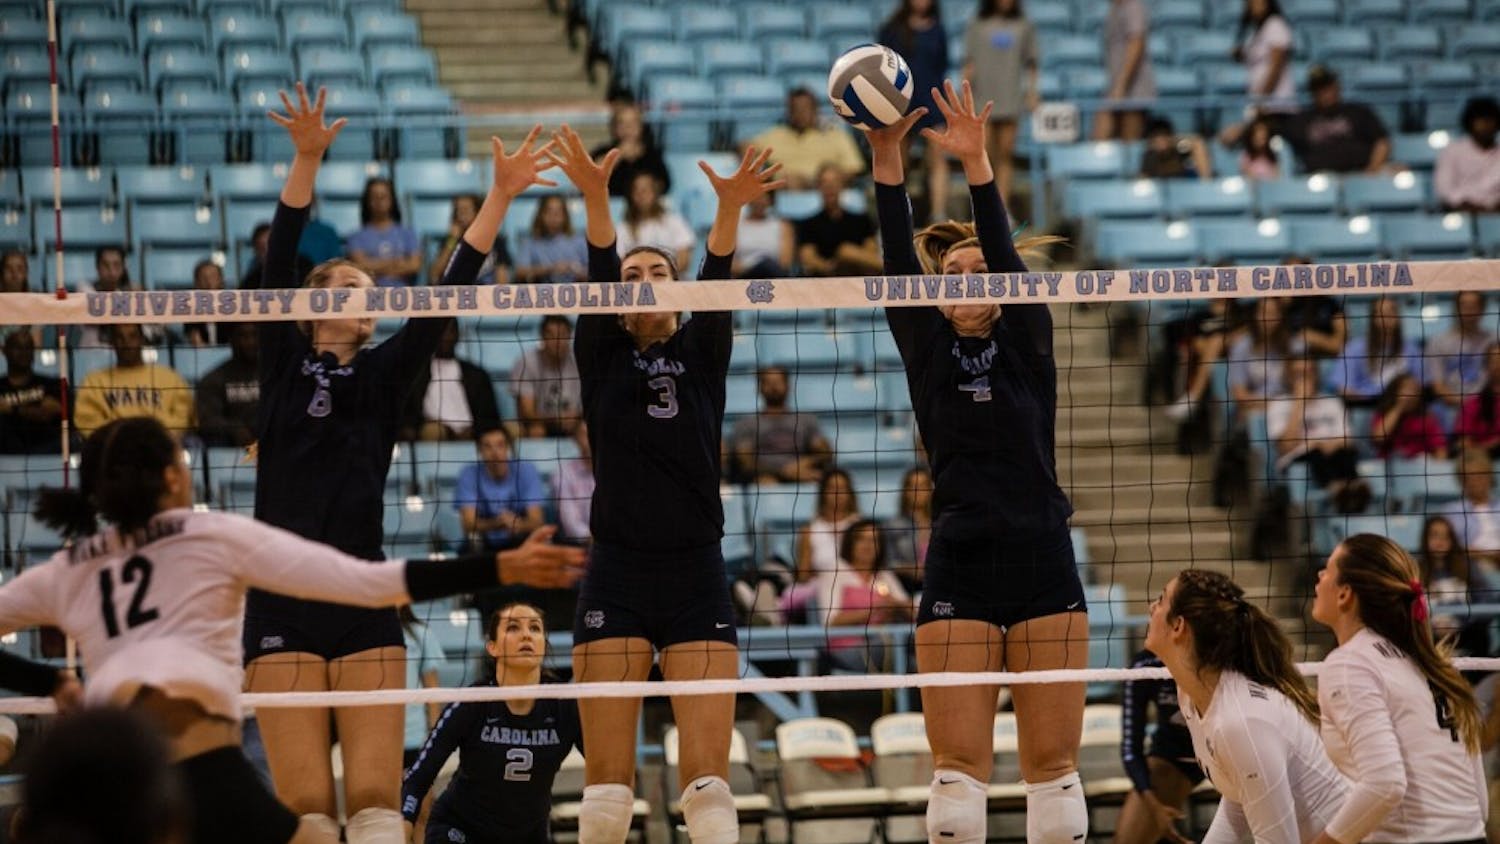 Taylor Borup (4) jumps in the air for a block against Wake Forest on Sunday at Carmichael Arena.